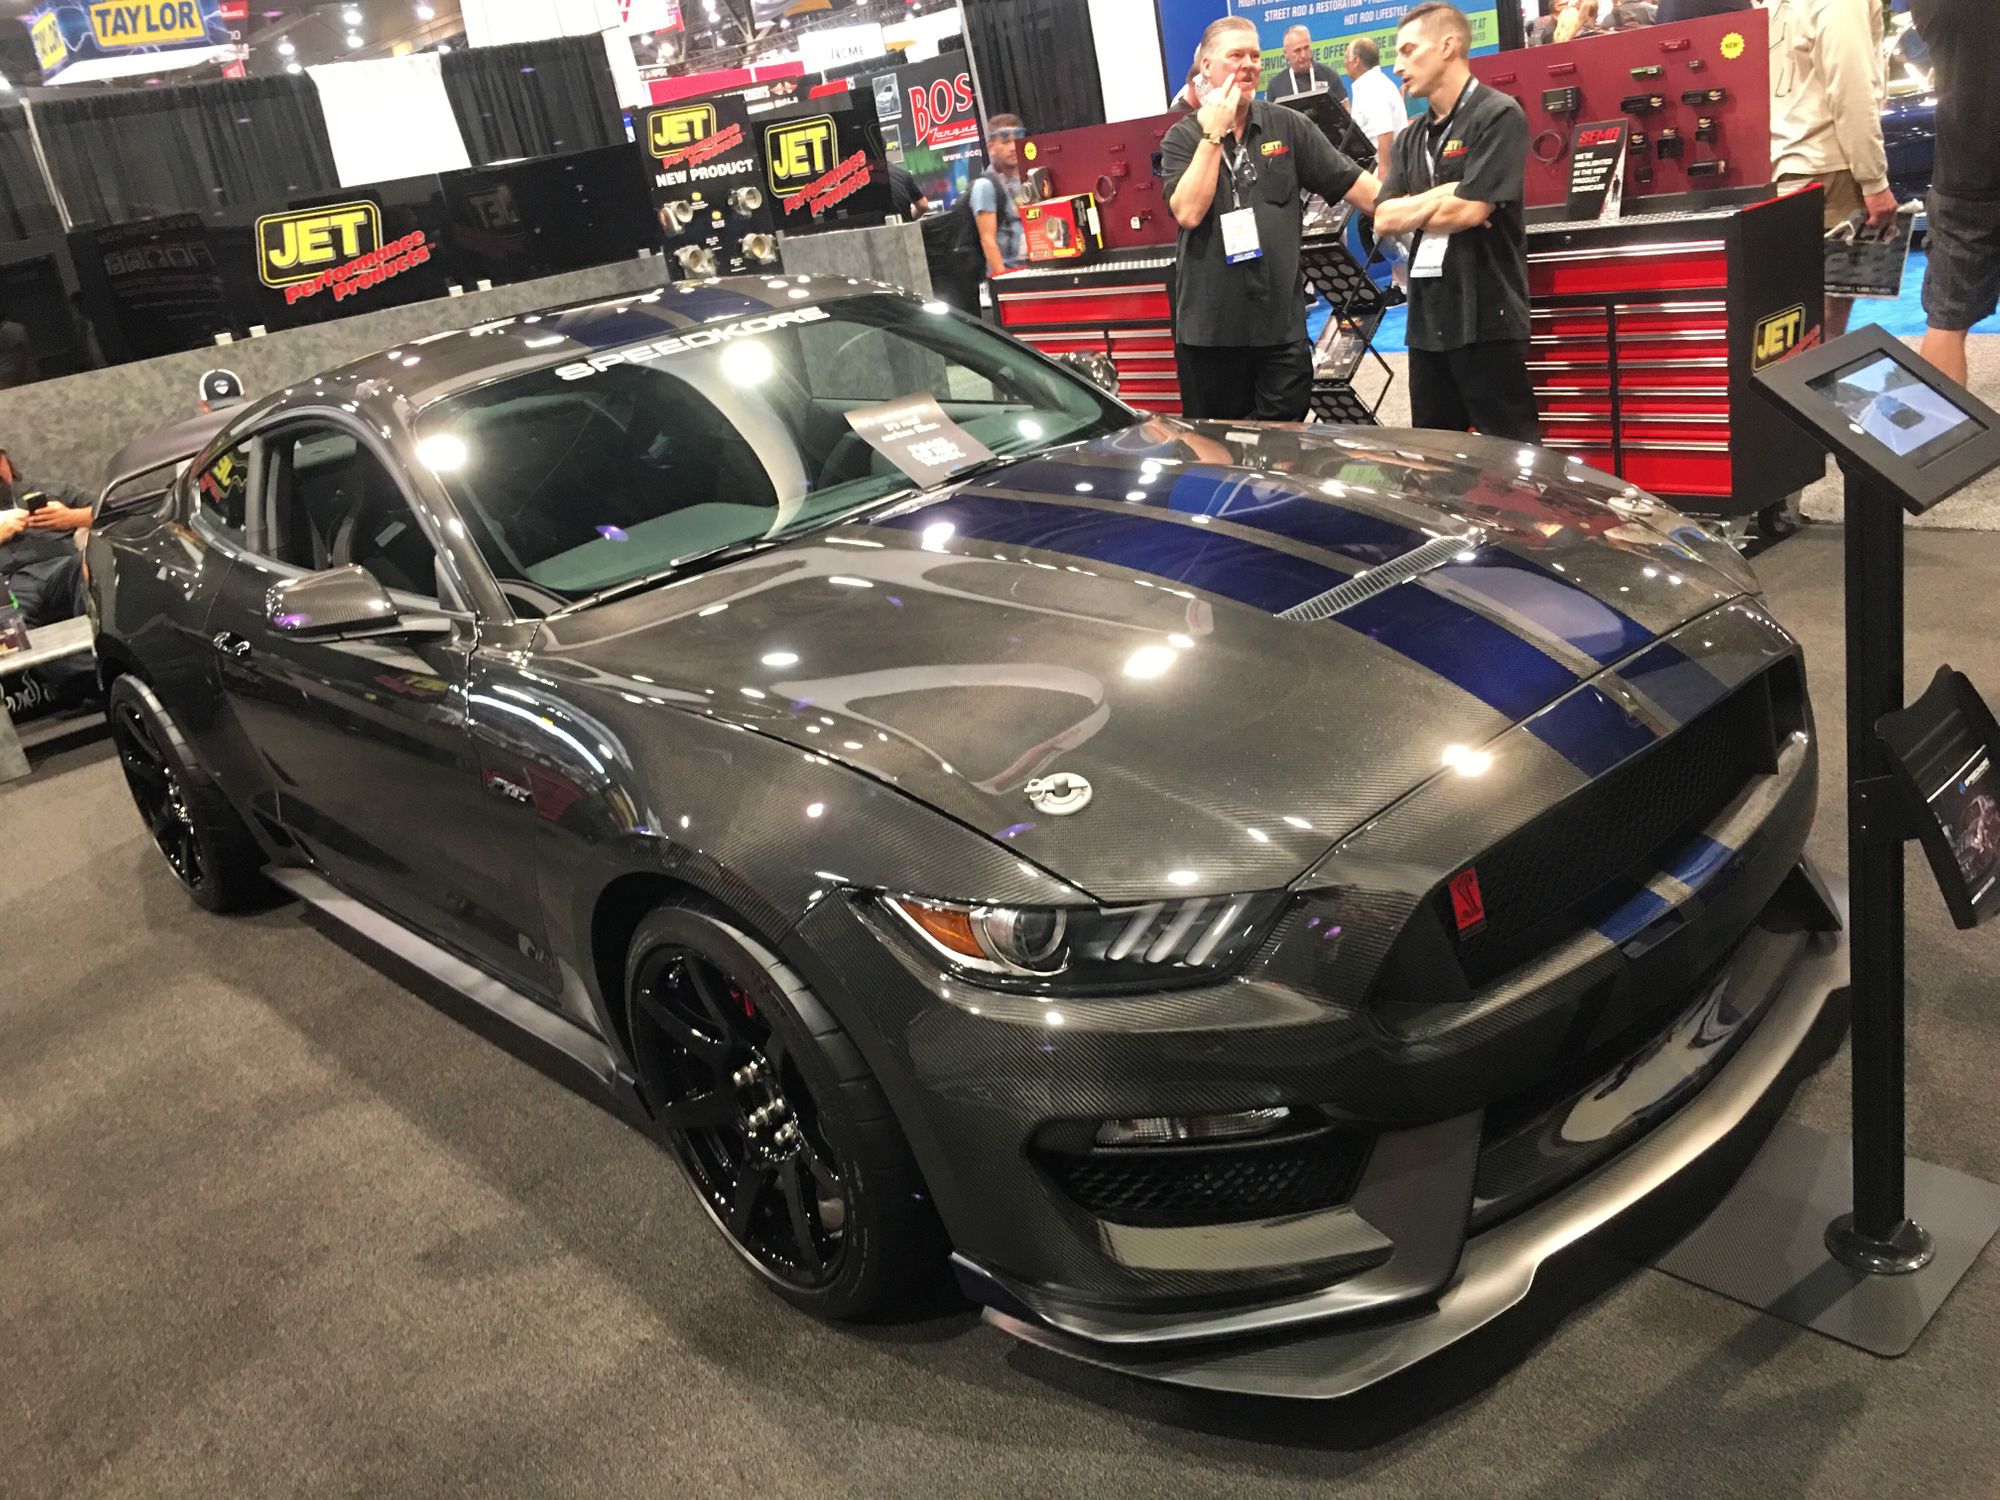 <img src="IMG_3892.jpg" alt="A Shelby GT350 Ford Mustang at SEMA">